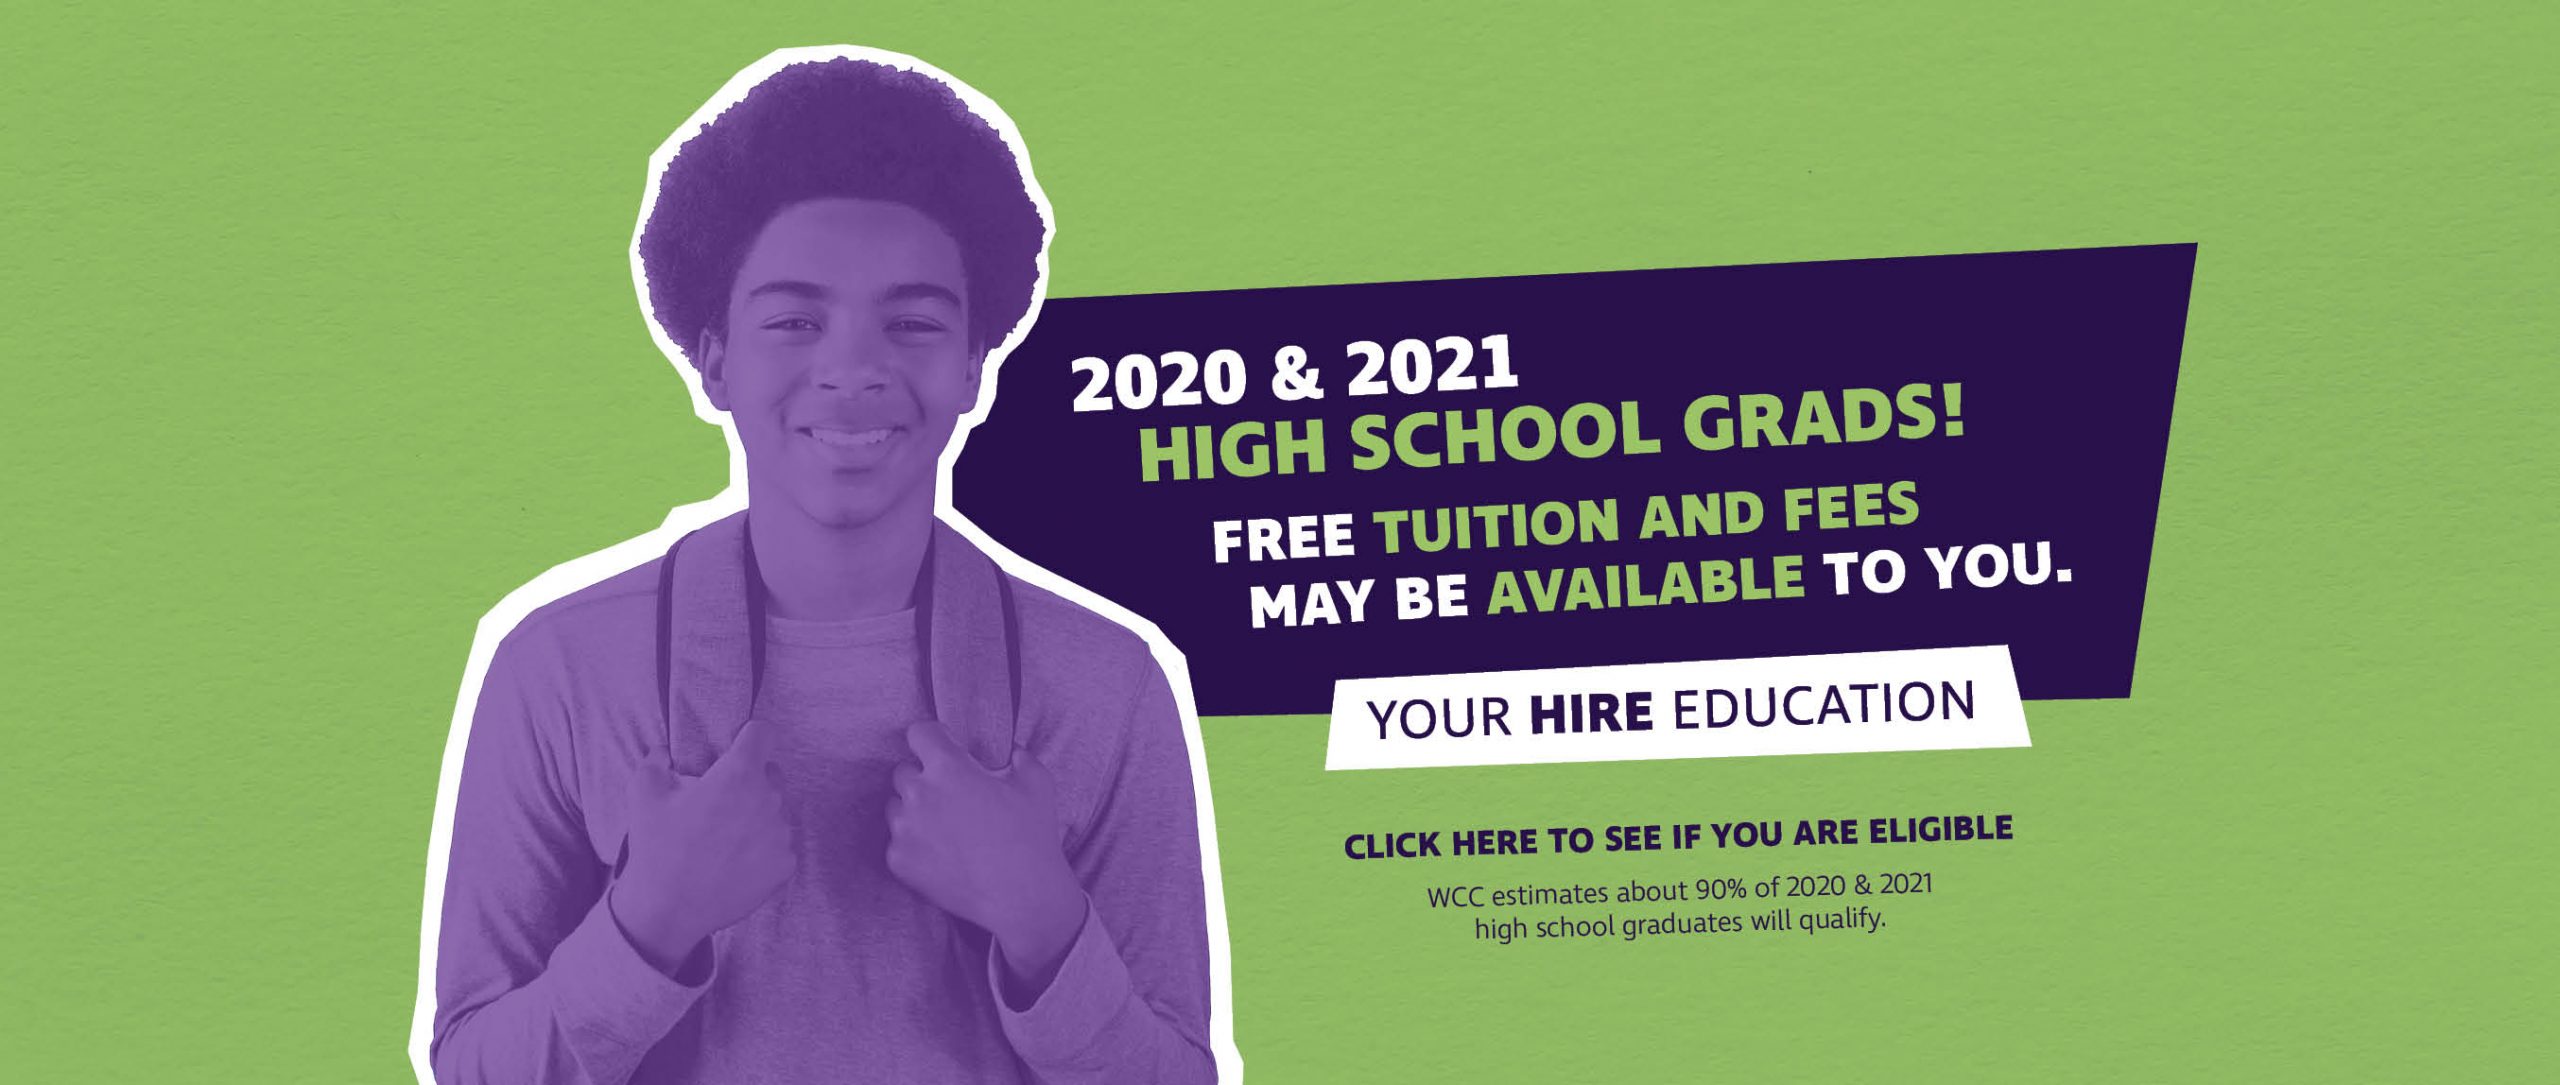 2020 & 2021 High School Grads! Free tuition and fees may be available to you. Your Hire Education, Click here to see if you are eligible, WCC estimates about 90% of 2020 & 2021 high school graduates will qualify.